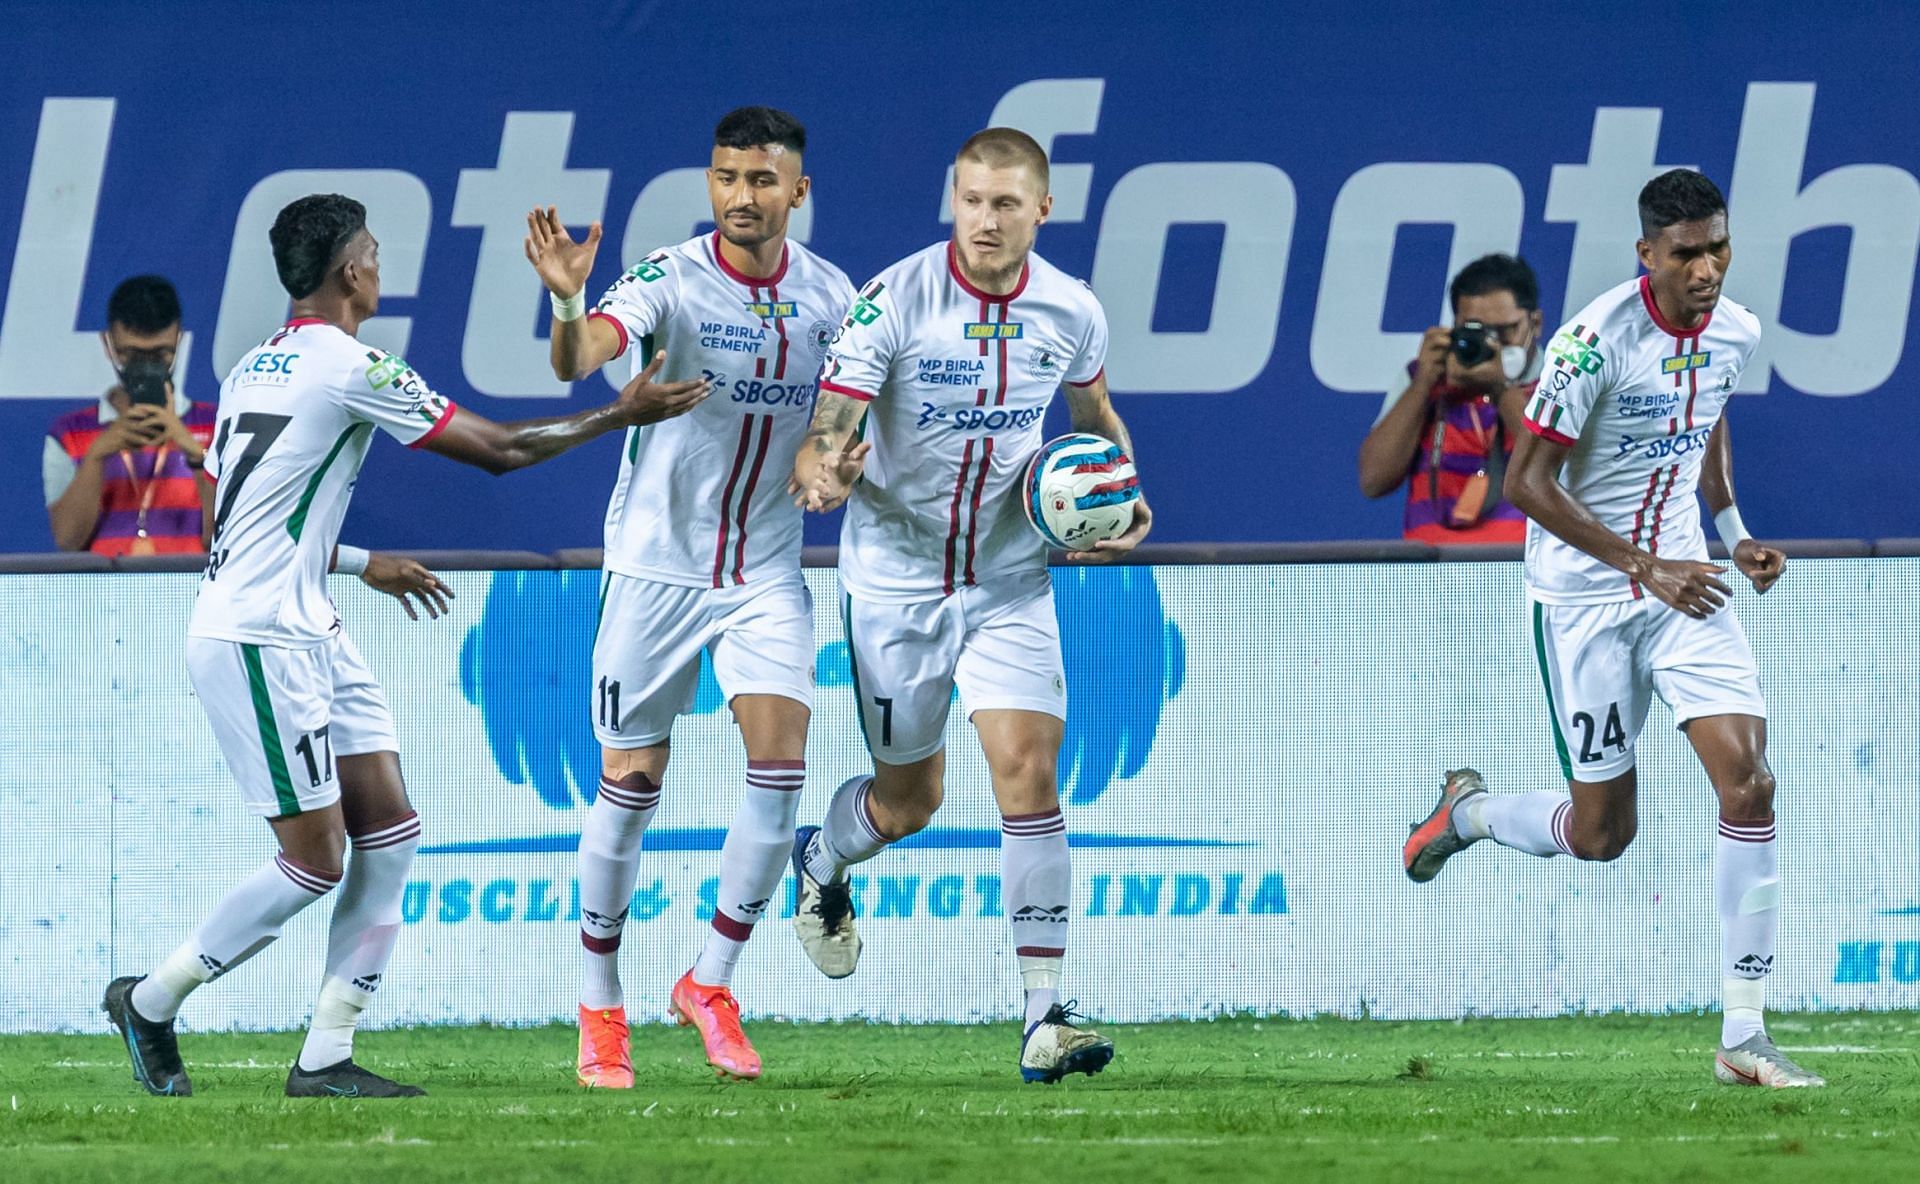 ATKMB players react after scoring against OFC. [Credits: ISL]